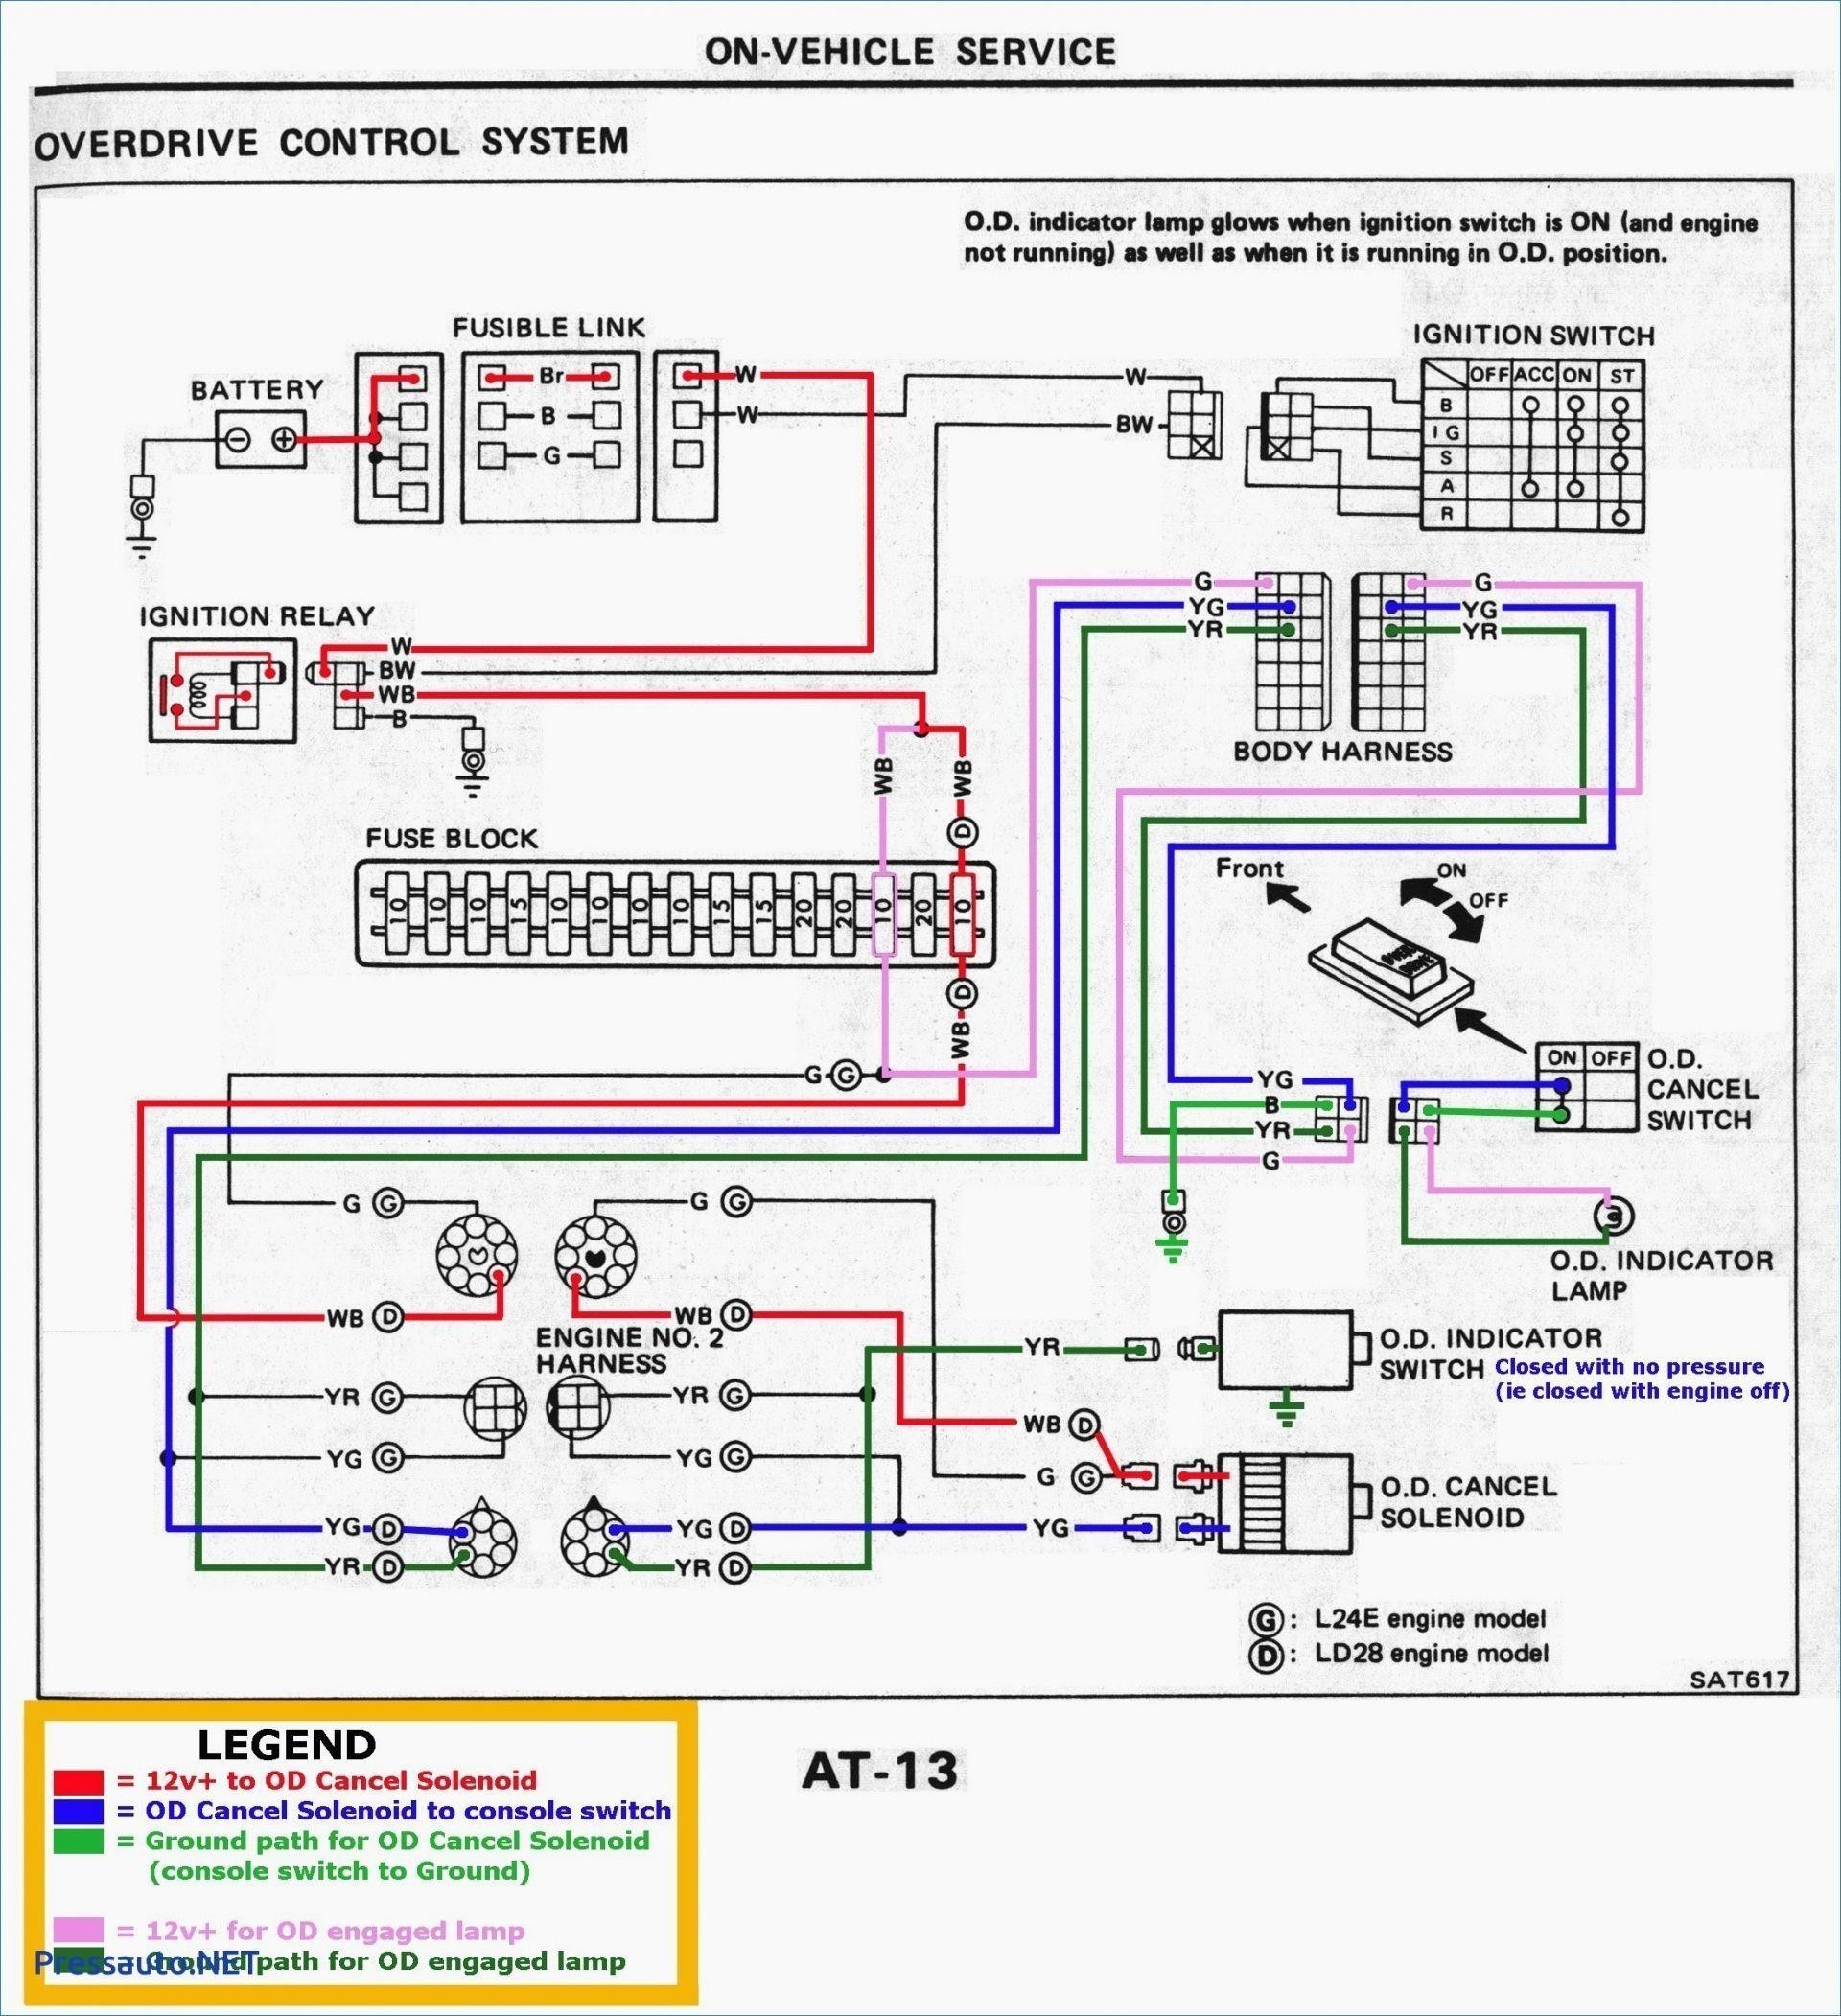 2000 S10 Taillight Wiring Diagram] Tail Light Wiring Diagram Dodge Full Version Hd Of 2000 S10 Taillight Wiring